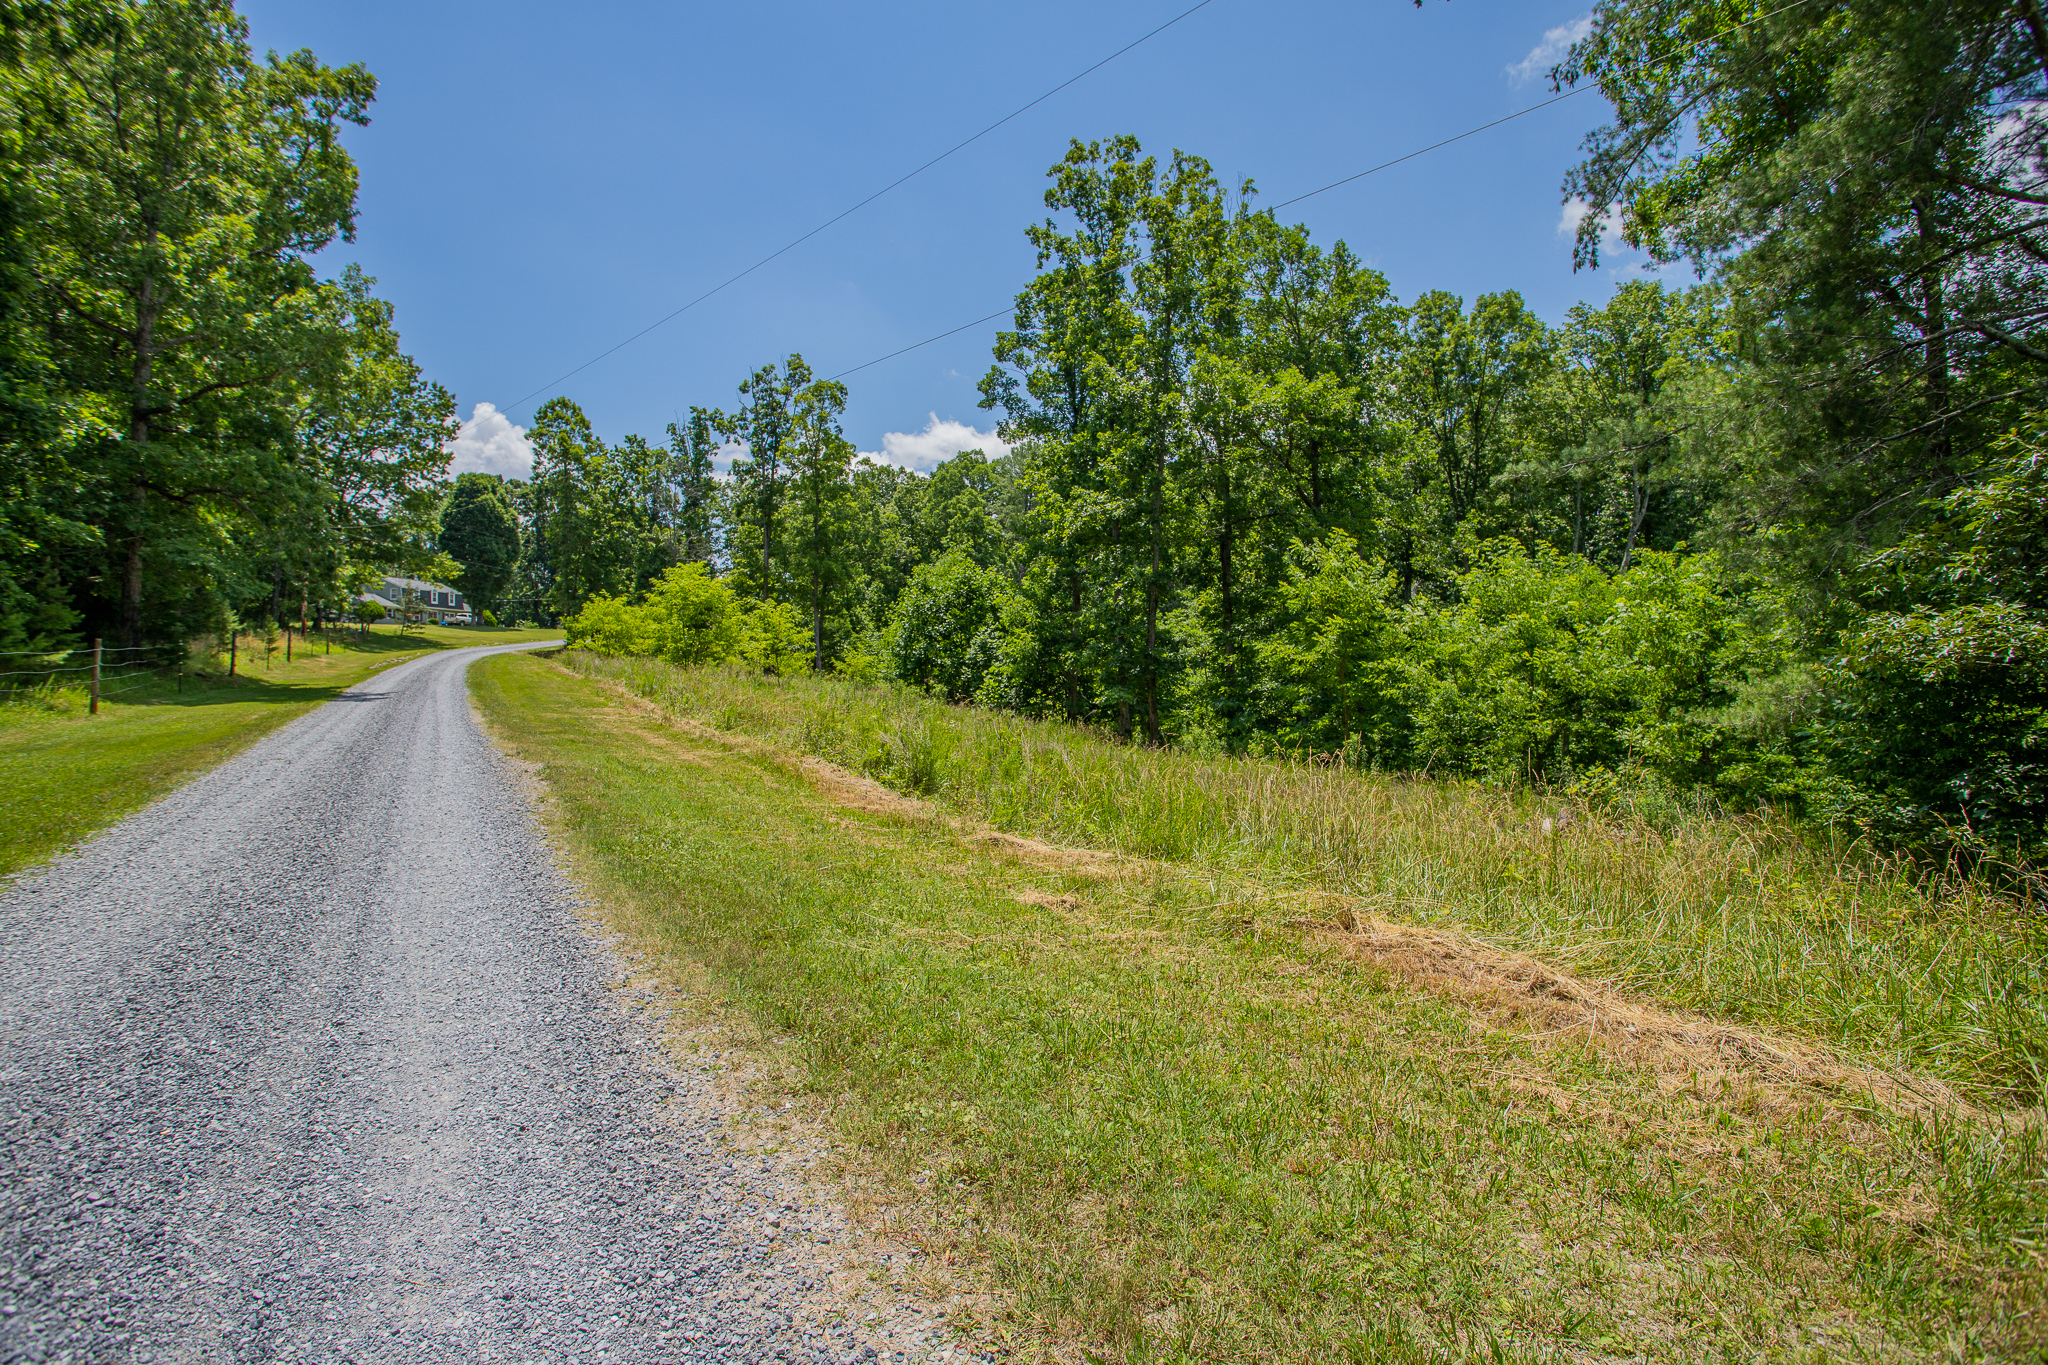 Gorgeous 5 Acres Down a Gravel Road Outside of Roanoke! Hidden Country Lane in Hardy, VA